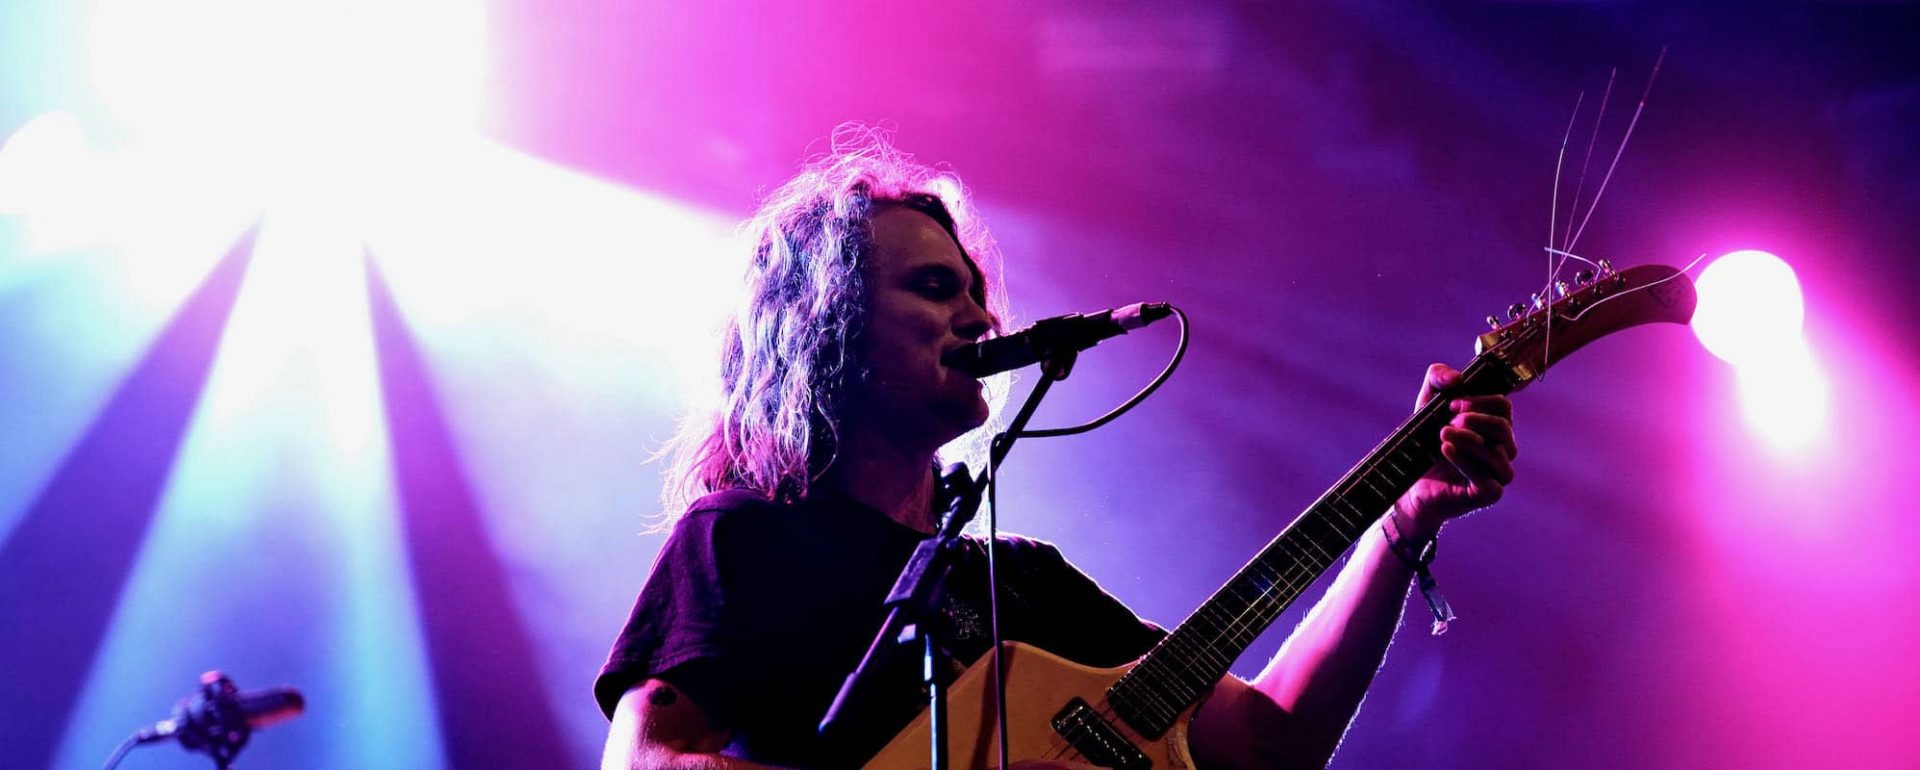 King Gizzard & The Lizard Wizard at The Greek Theater